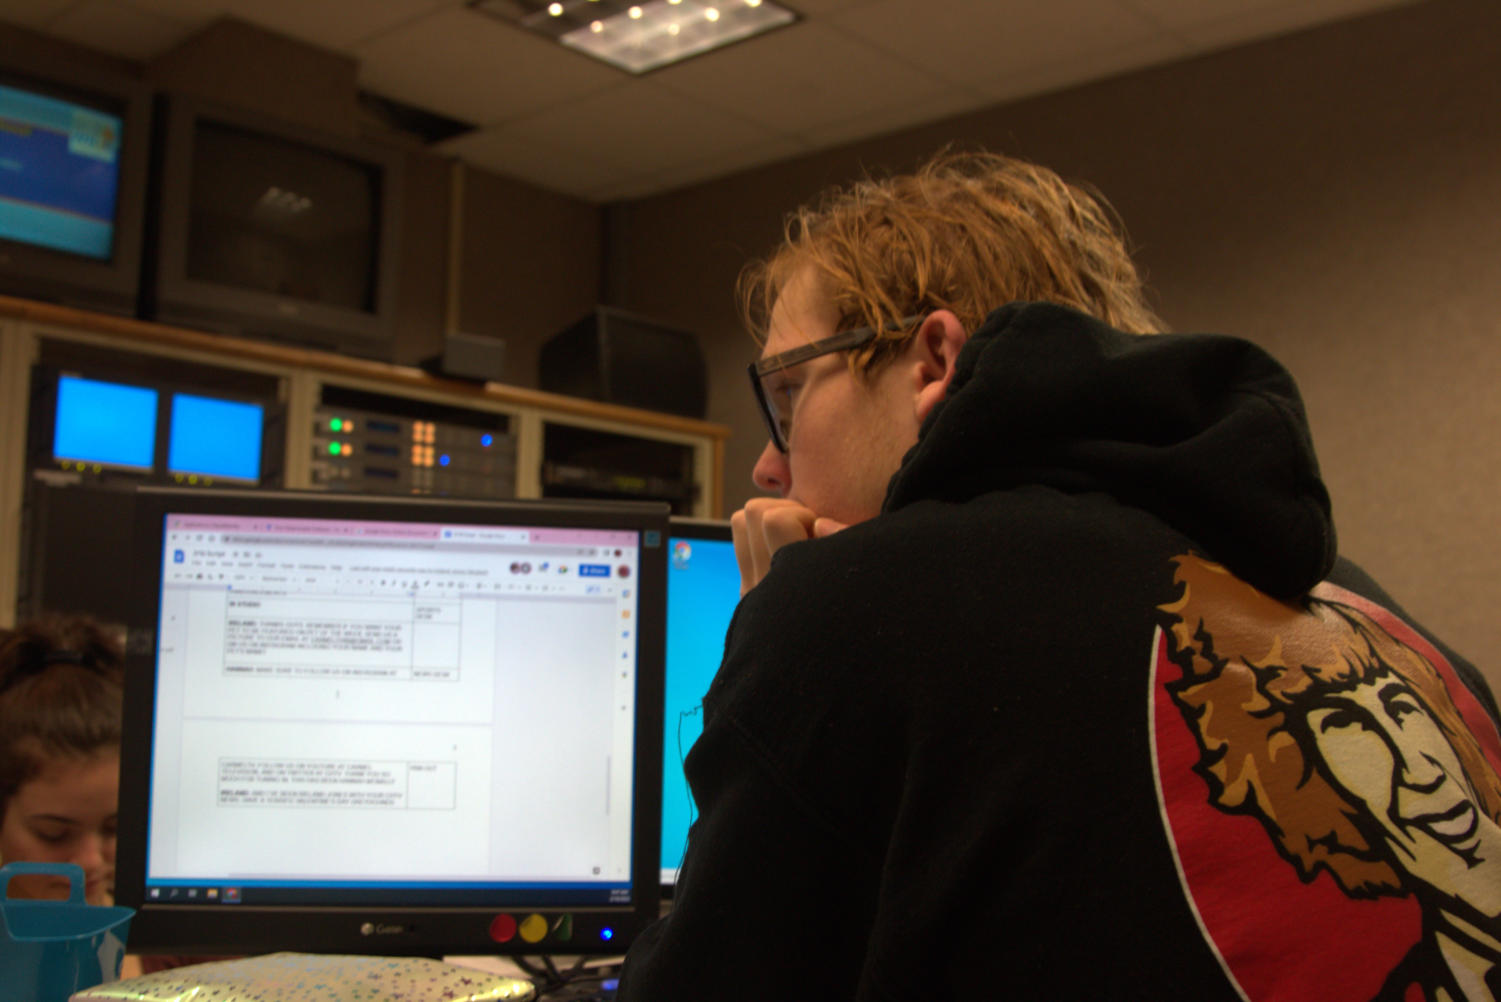 Ryan C. putting the script for the newscast into the teleprompter